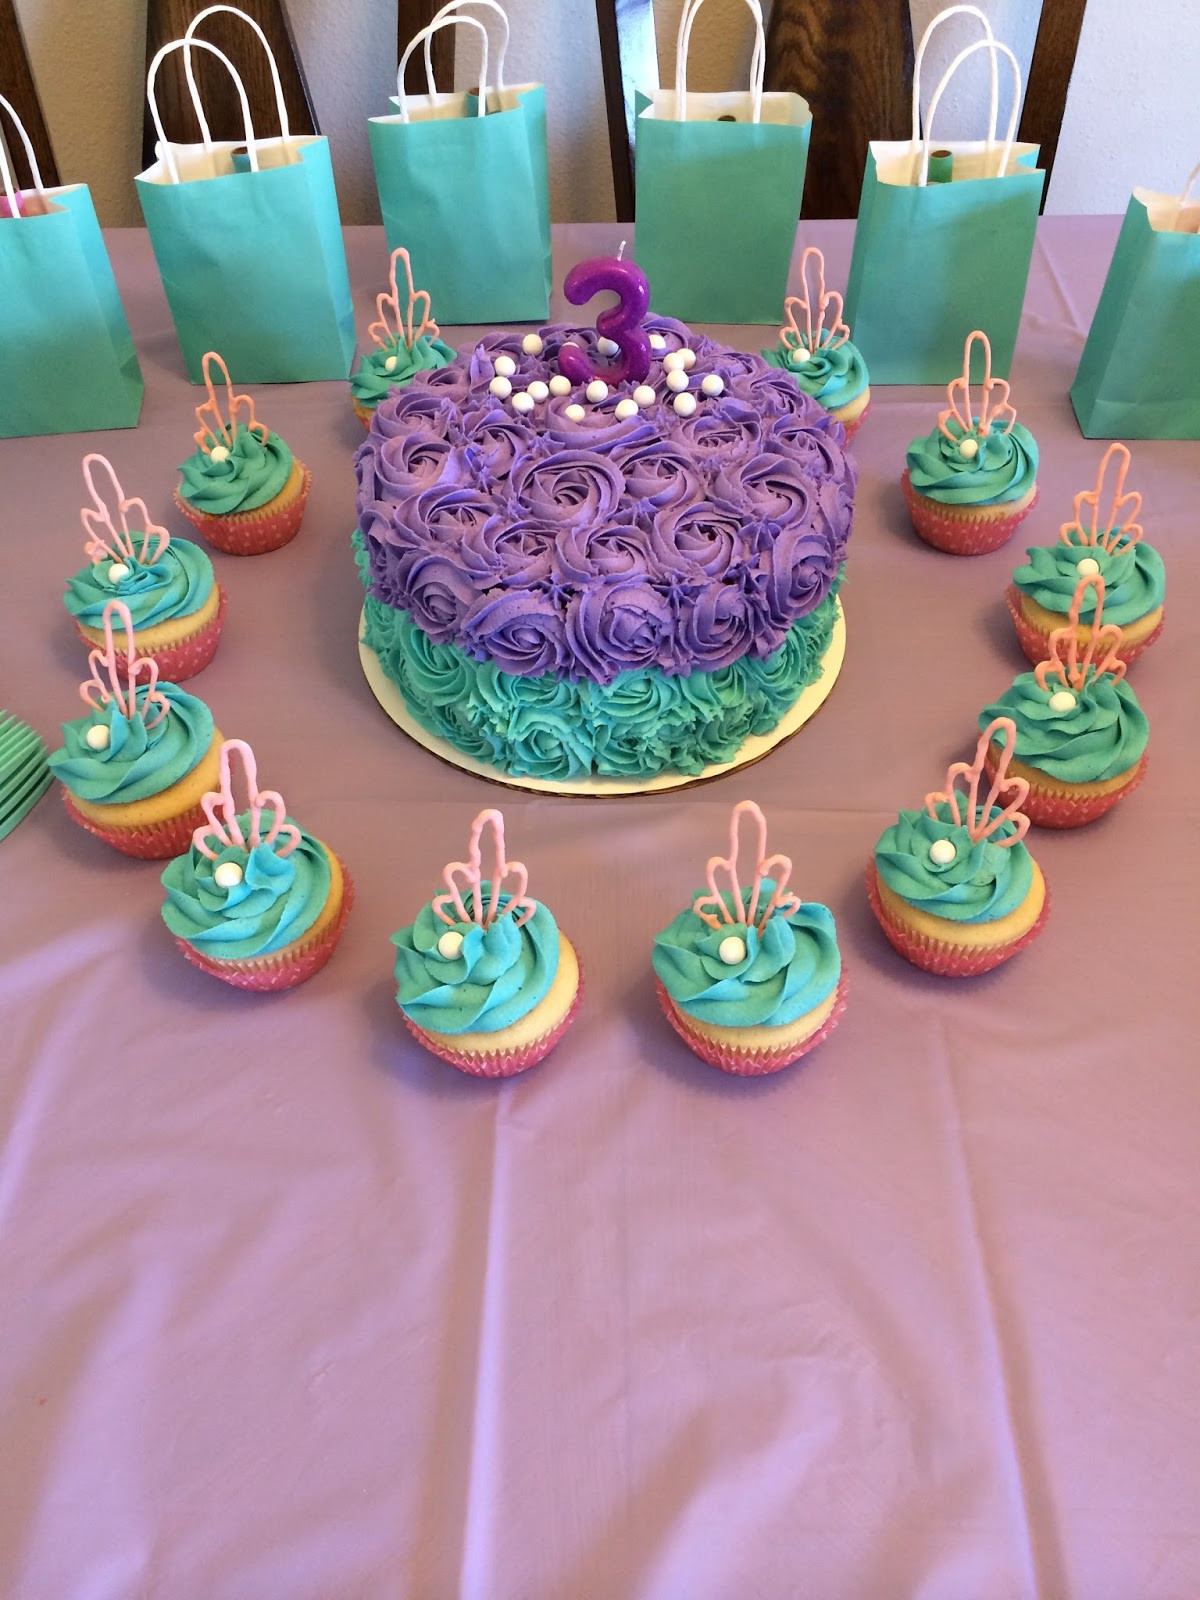 Little Mermaid Birthday Party Decorations
 Little Mermaid birthday party